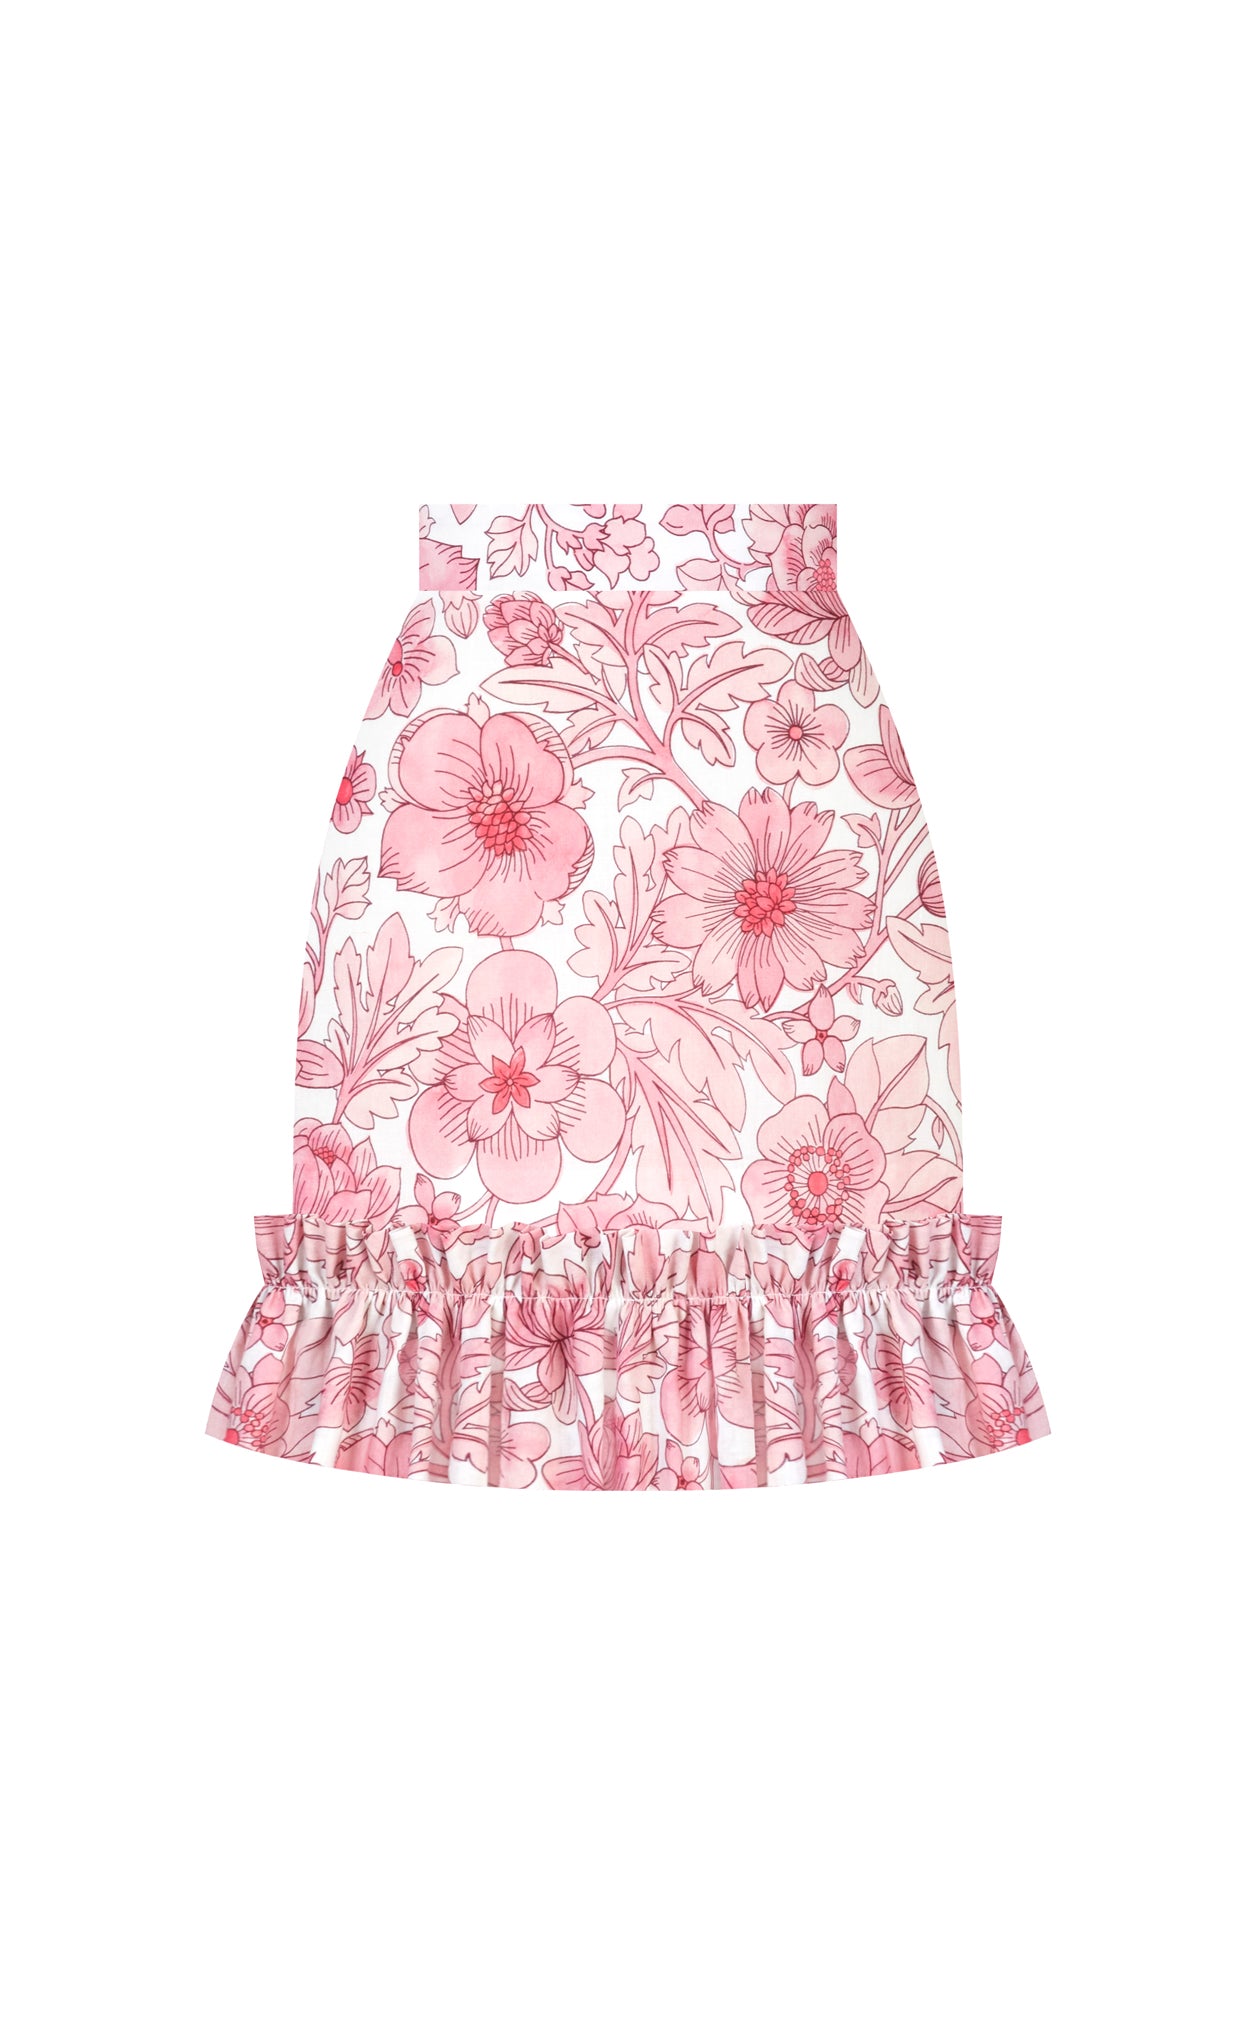 THE FRILLY NEARLY NUTHIN' SKIRT